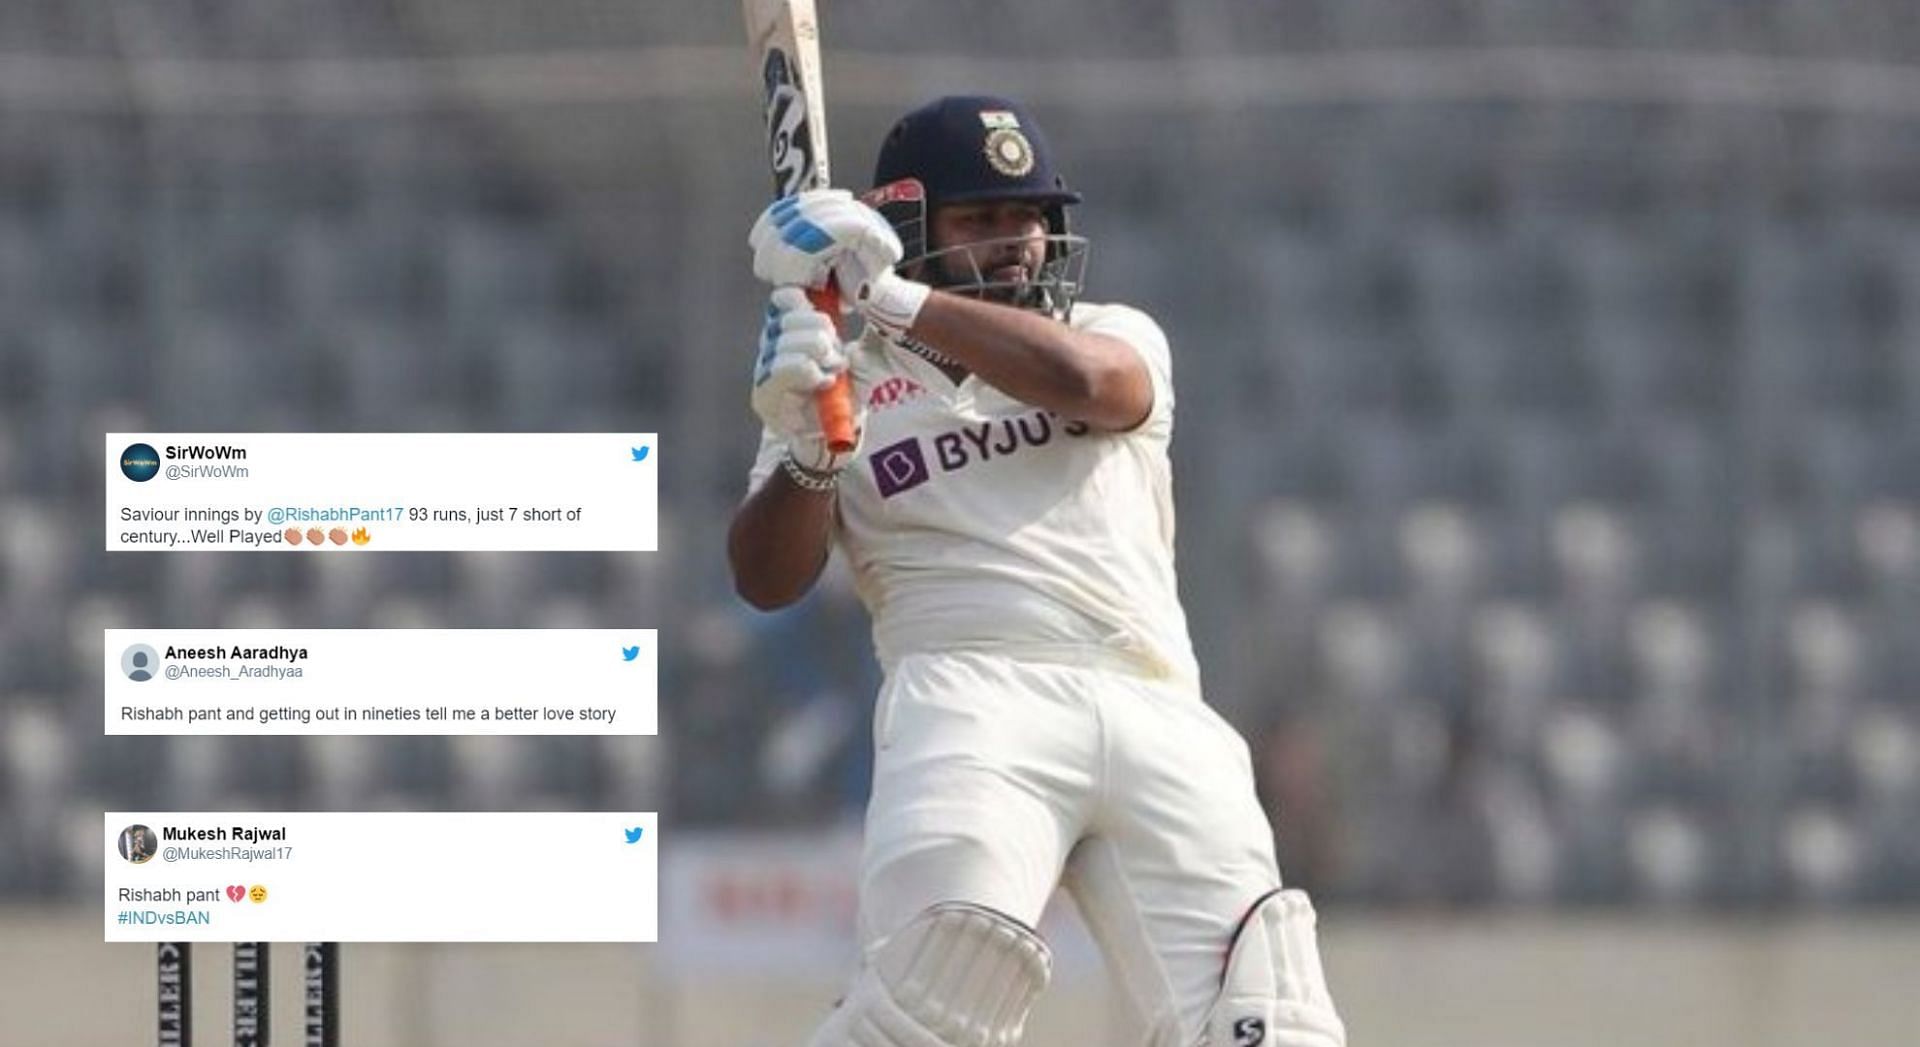 “Rishabh Pant and getting out in nineties, tell me a better love story ...